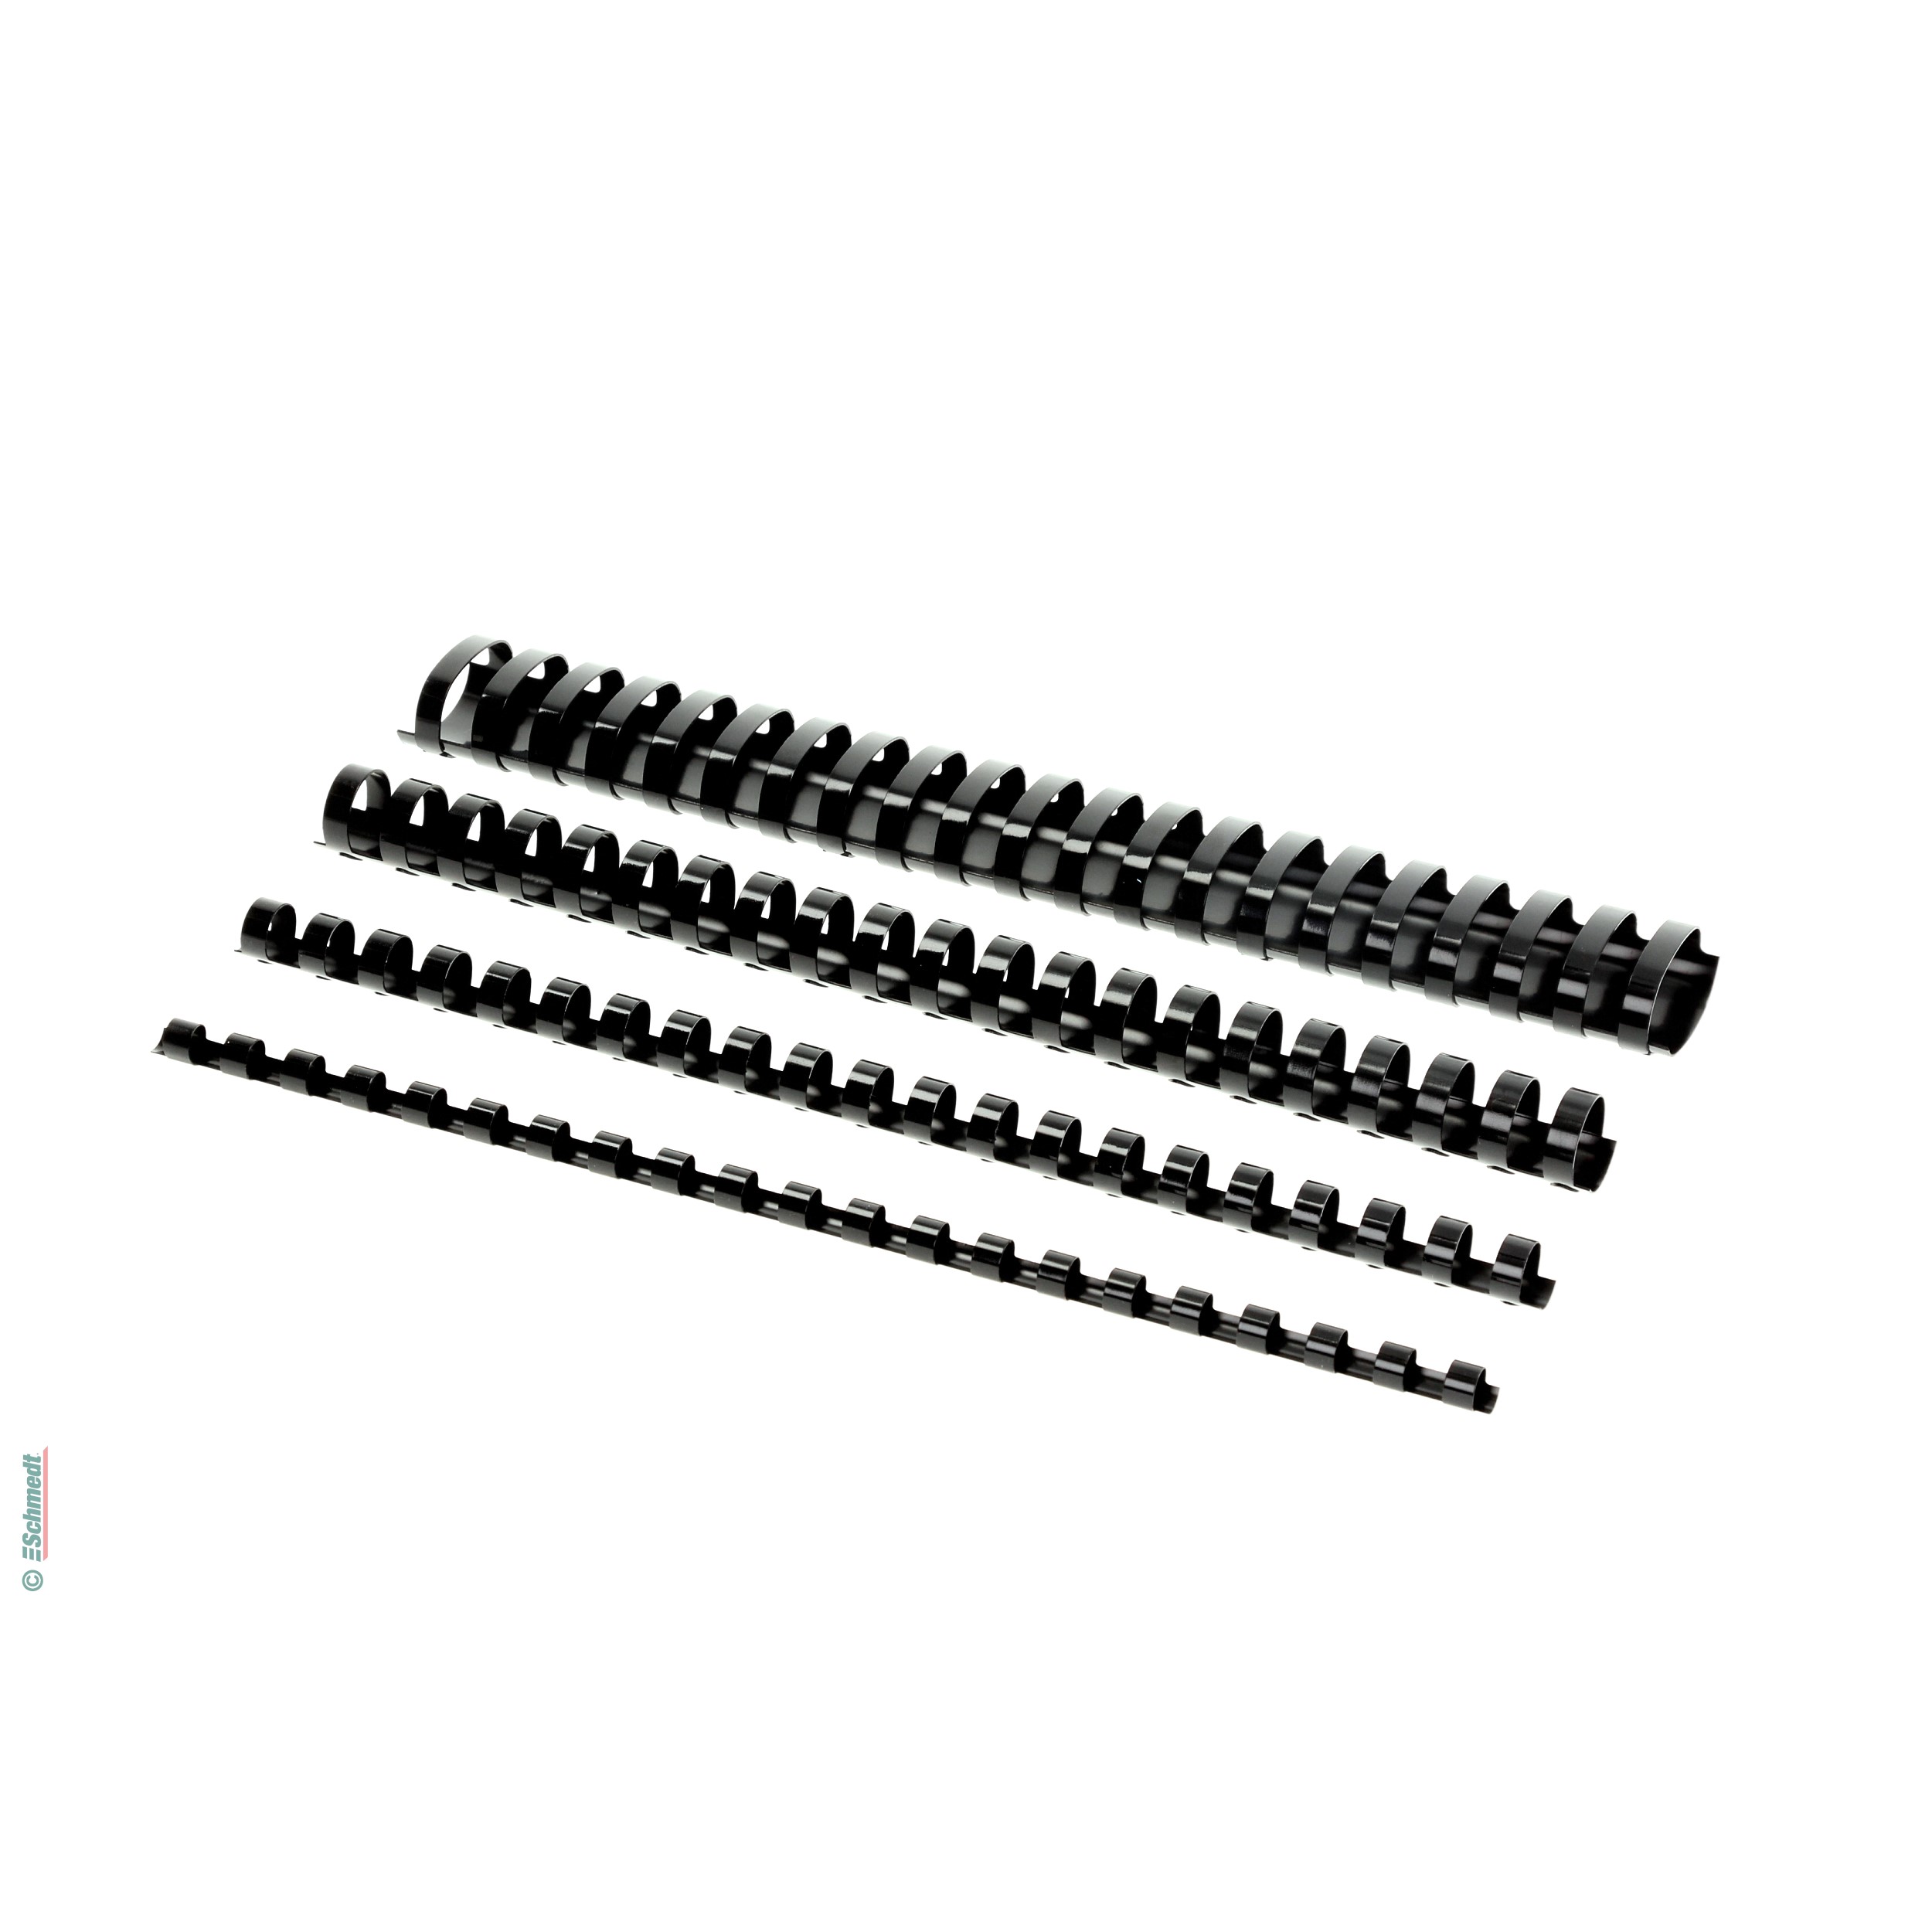 Plastic binding combs - round - Diameter (in mm) 10 - Colour black - to be processed in plastic-comb binding machines... - image-1